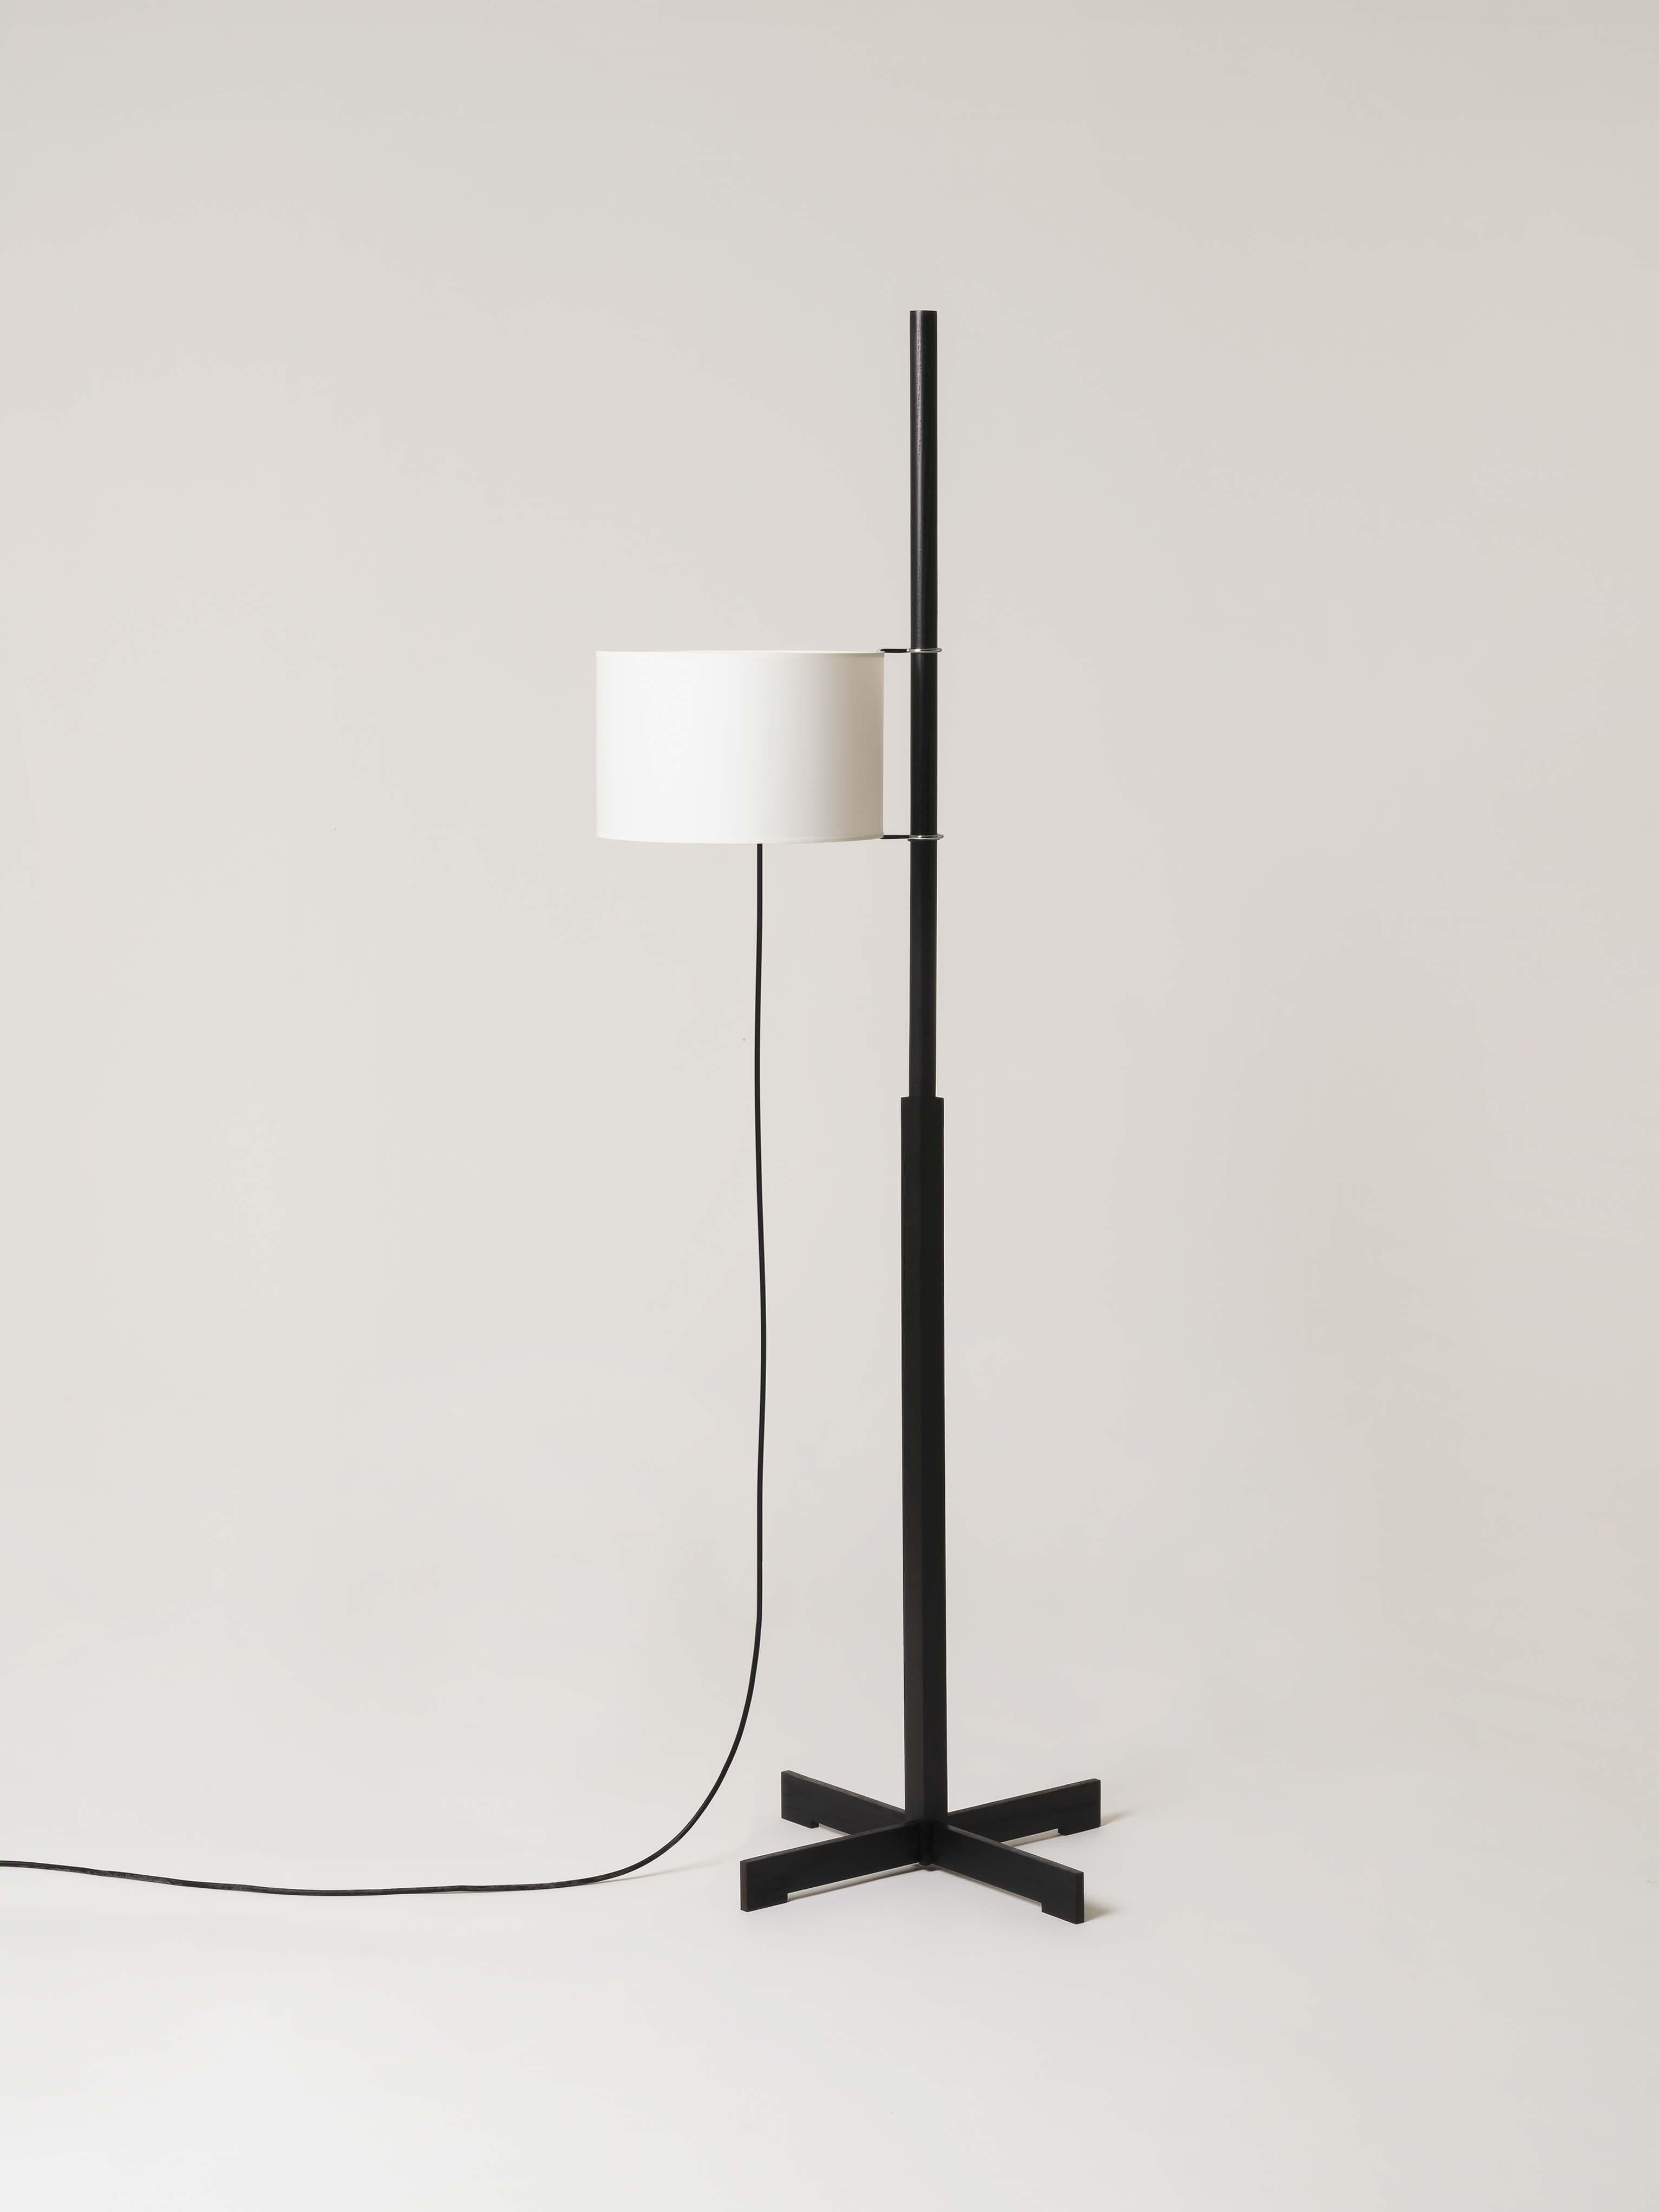 White and black oak TMM floor lamp by Miguel Milá
Dimensions: D 50 x W 60 x H 166 cm
Materials: Cherry wood, parchment lampshade.
Available in 3 lampshades: beige, white and white with diffuser.
Available in 5 woods: beech, cherry, walnut,